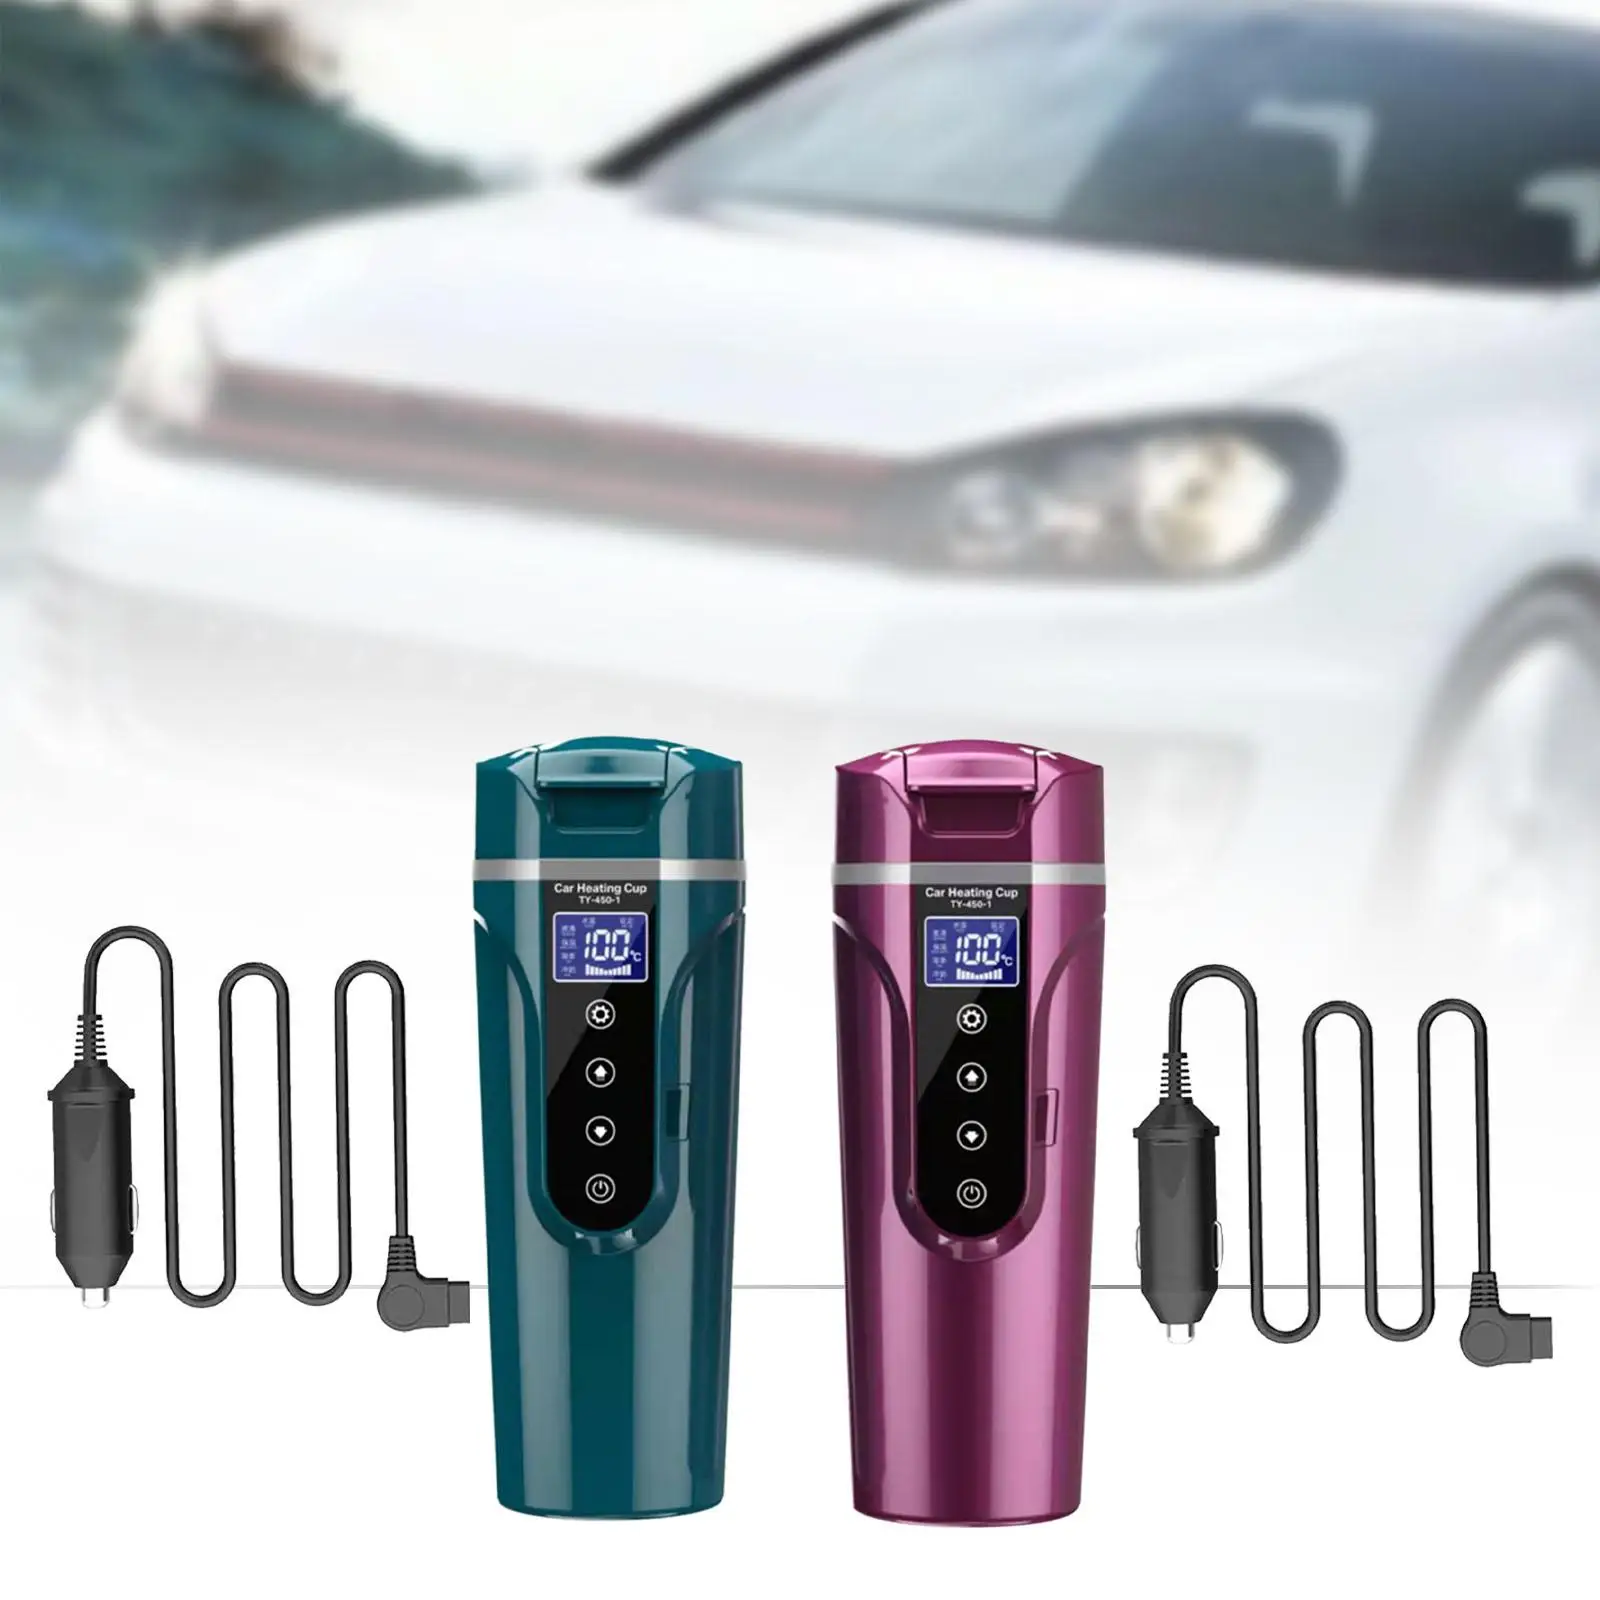 24V/12V Electric Travel Kettle Portable Fast Boil Car Heating Cup Car Travel Kettle Water Boiler for Tea Water Milk Coffee Car